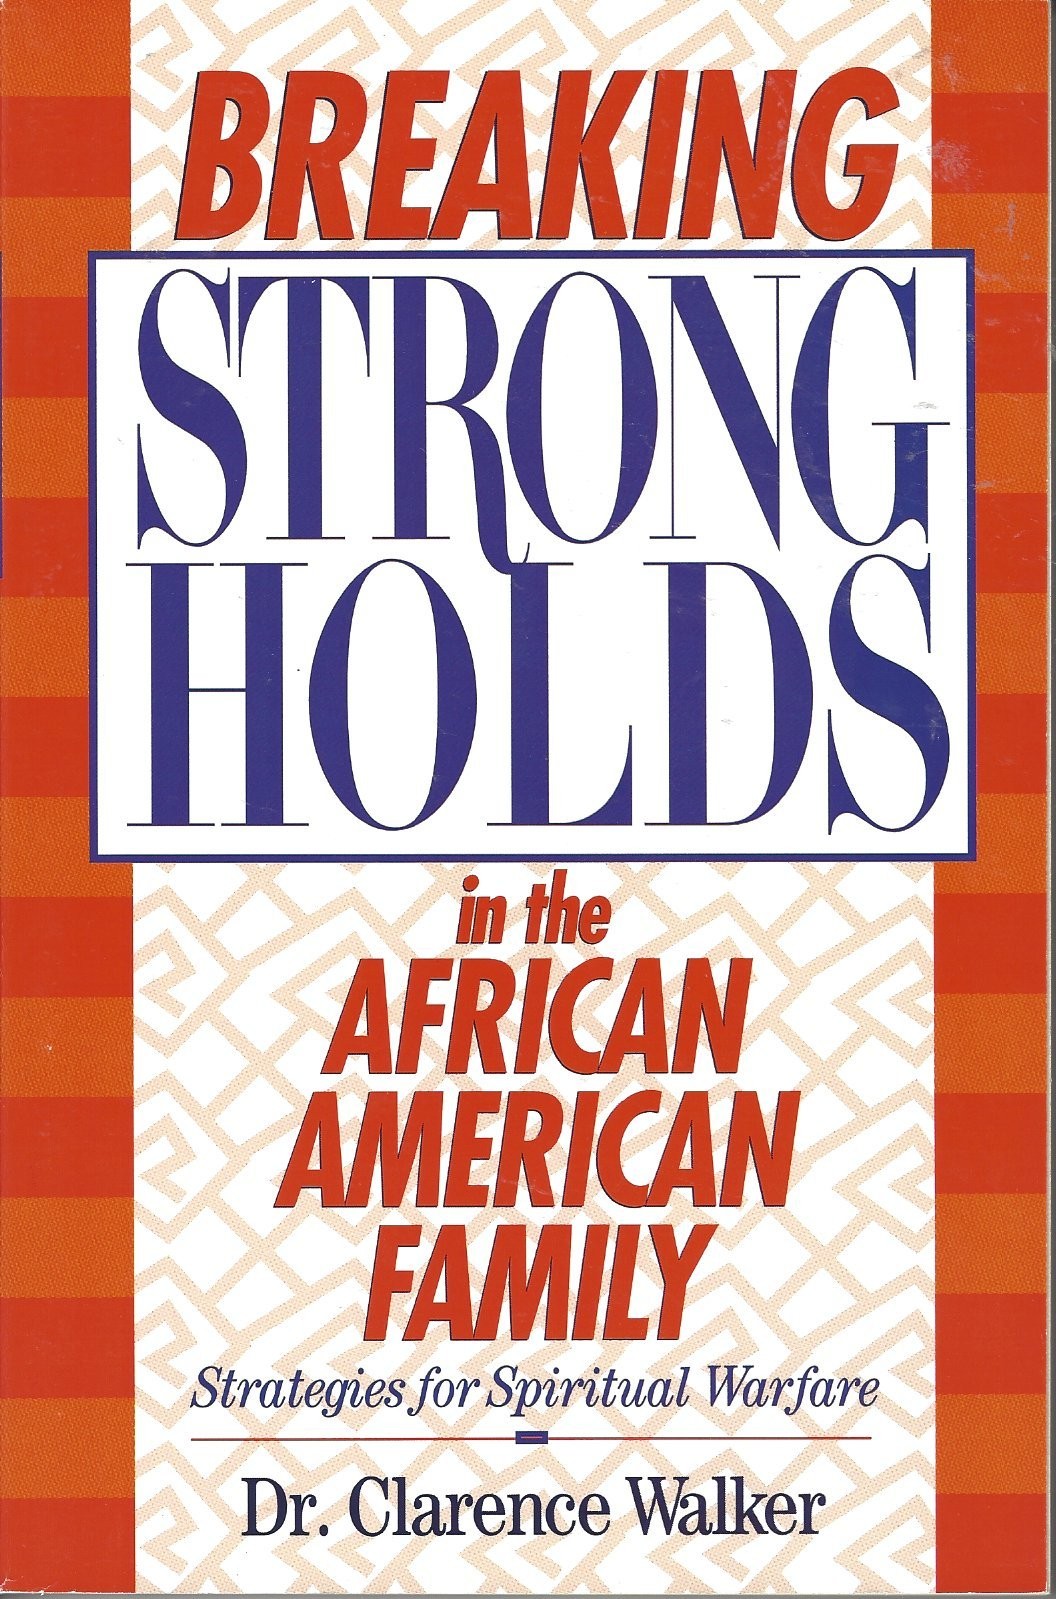 Breaking Stongholds in the African American Family  (1996)  (Front)